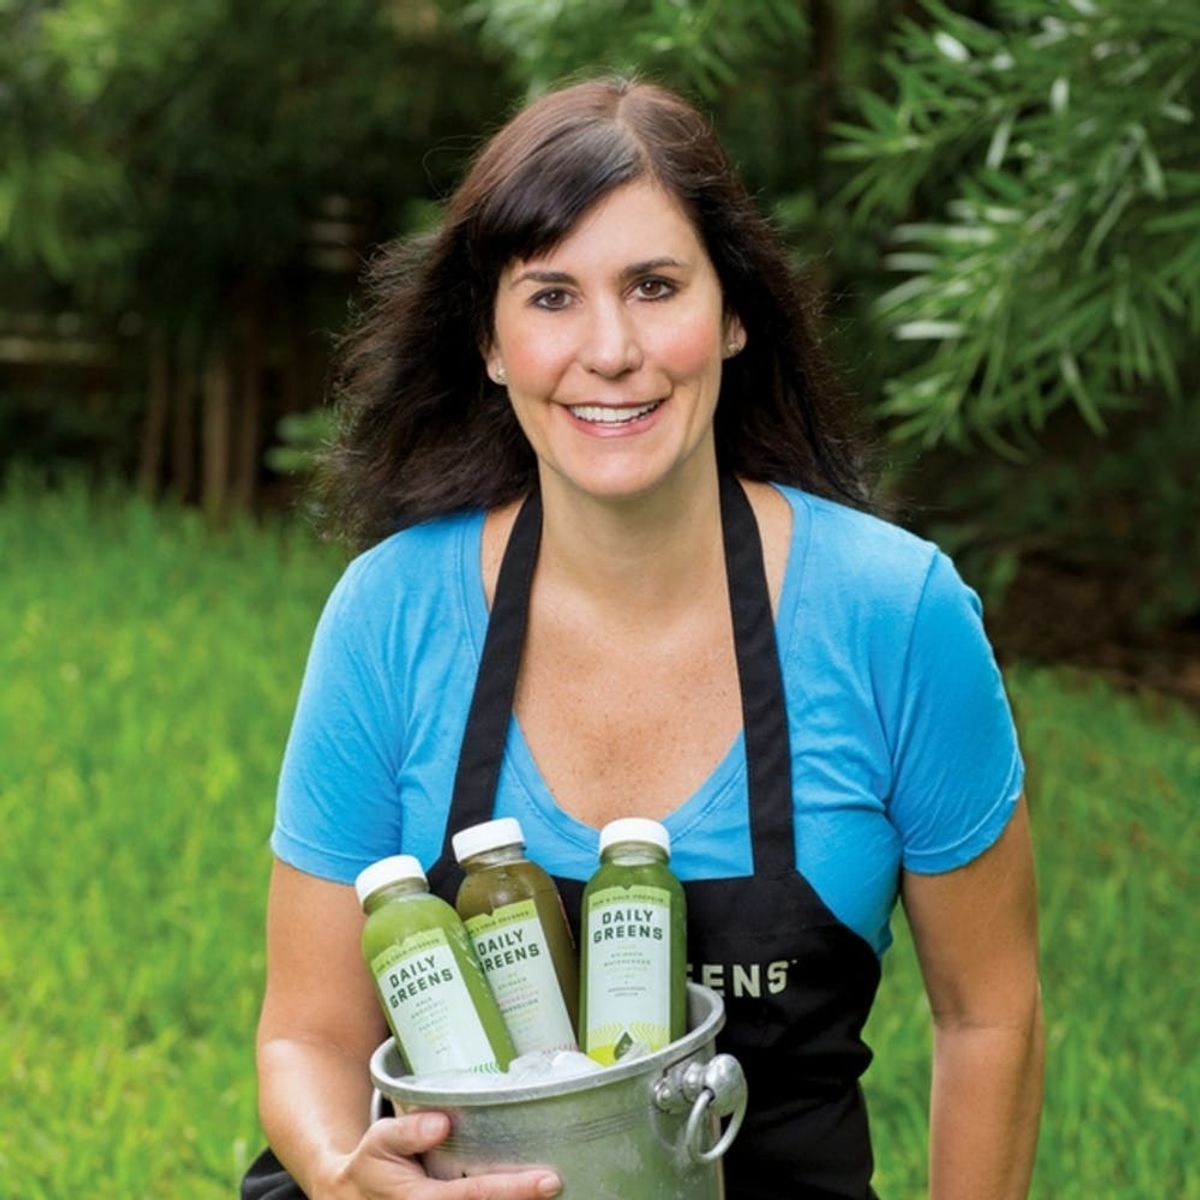 This Daily Greens #Girlboss Beat Breast Cancer + Built a Business Along the Way